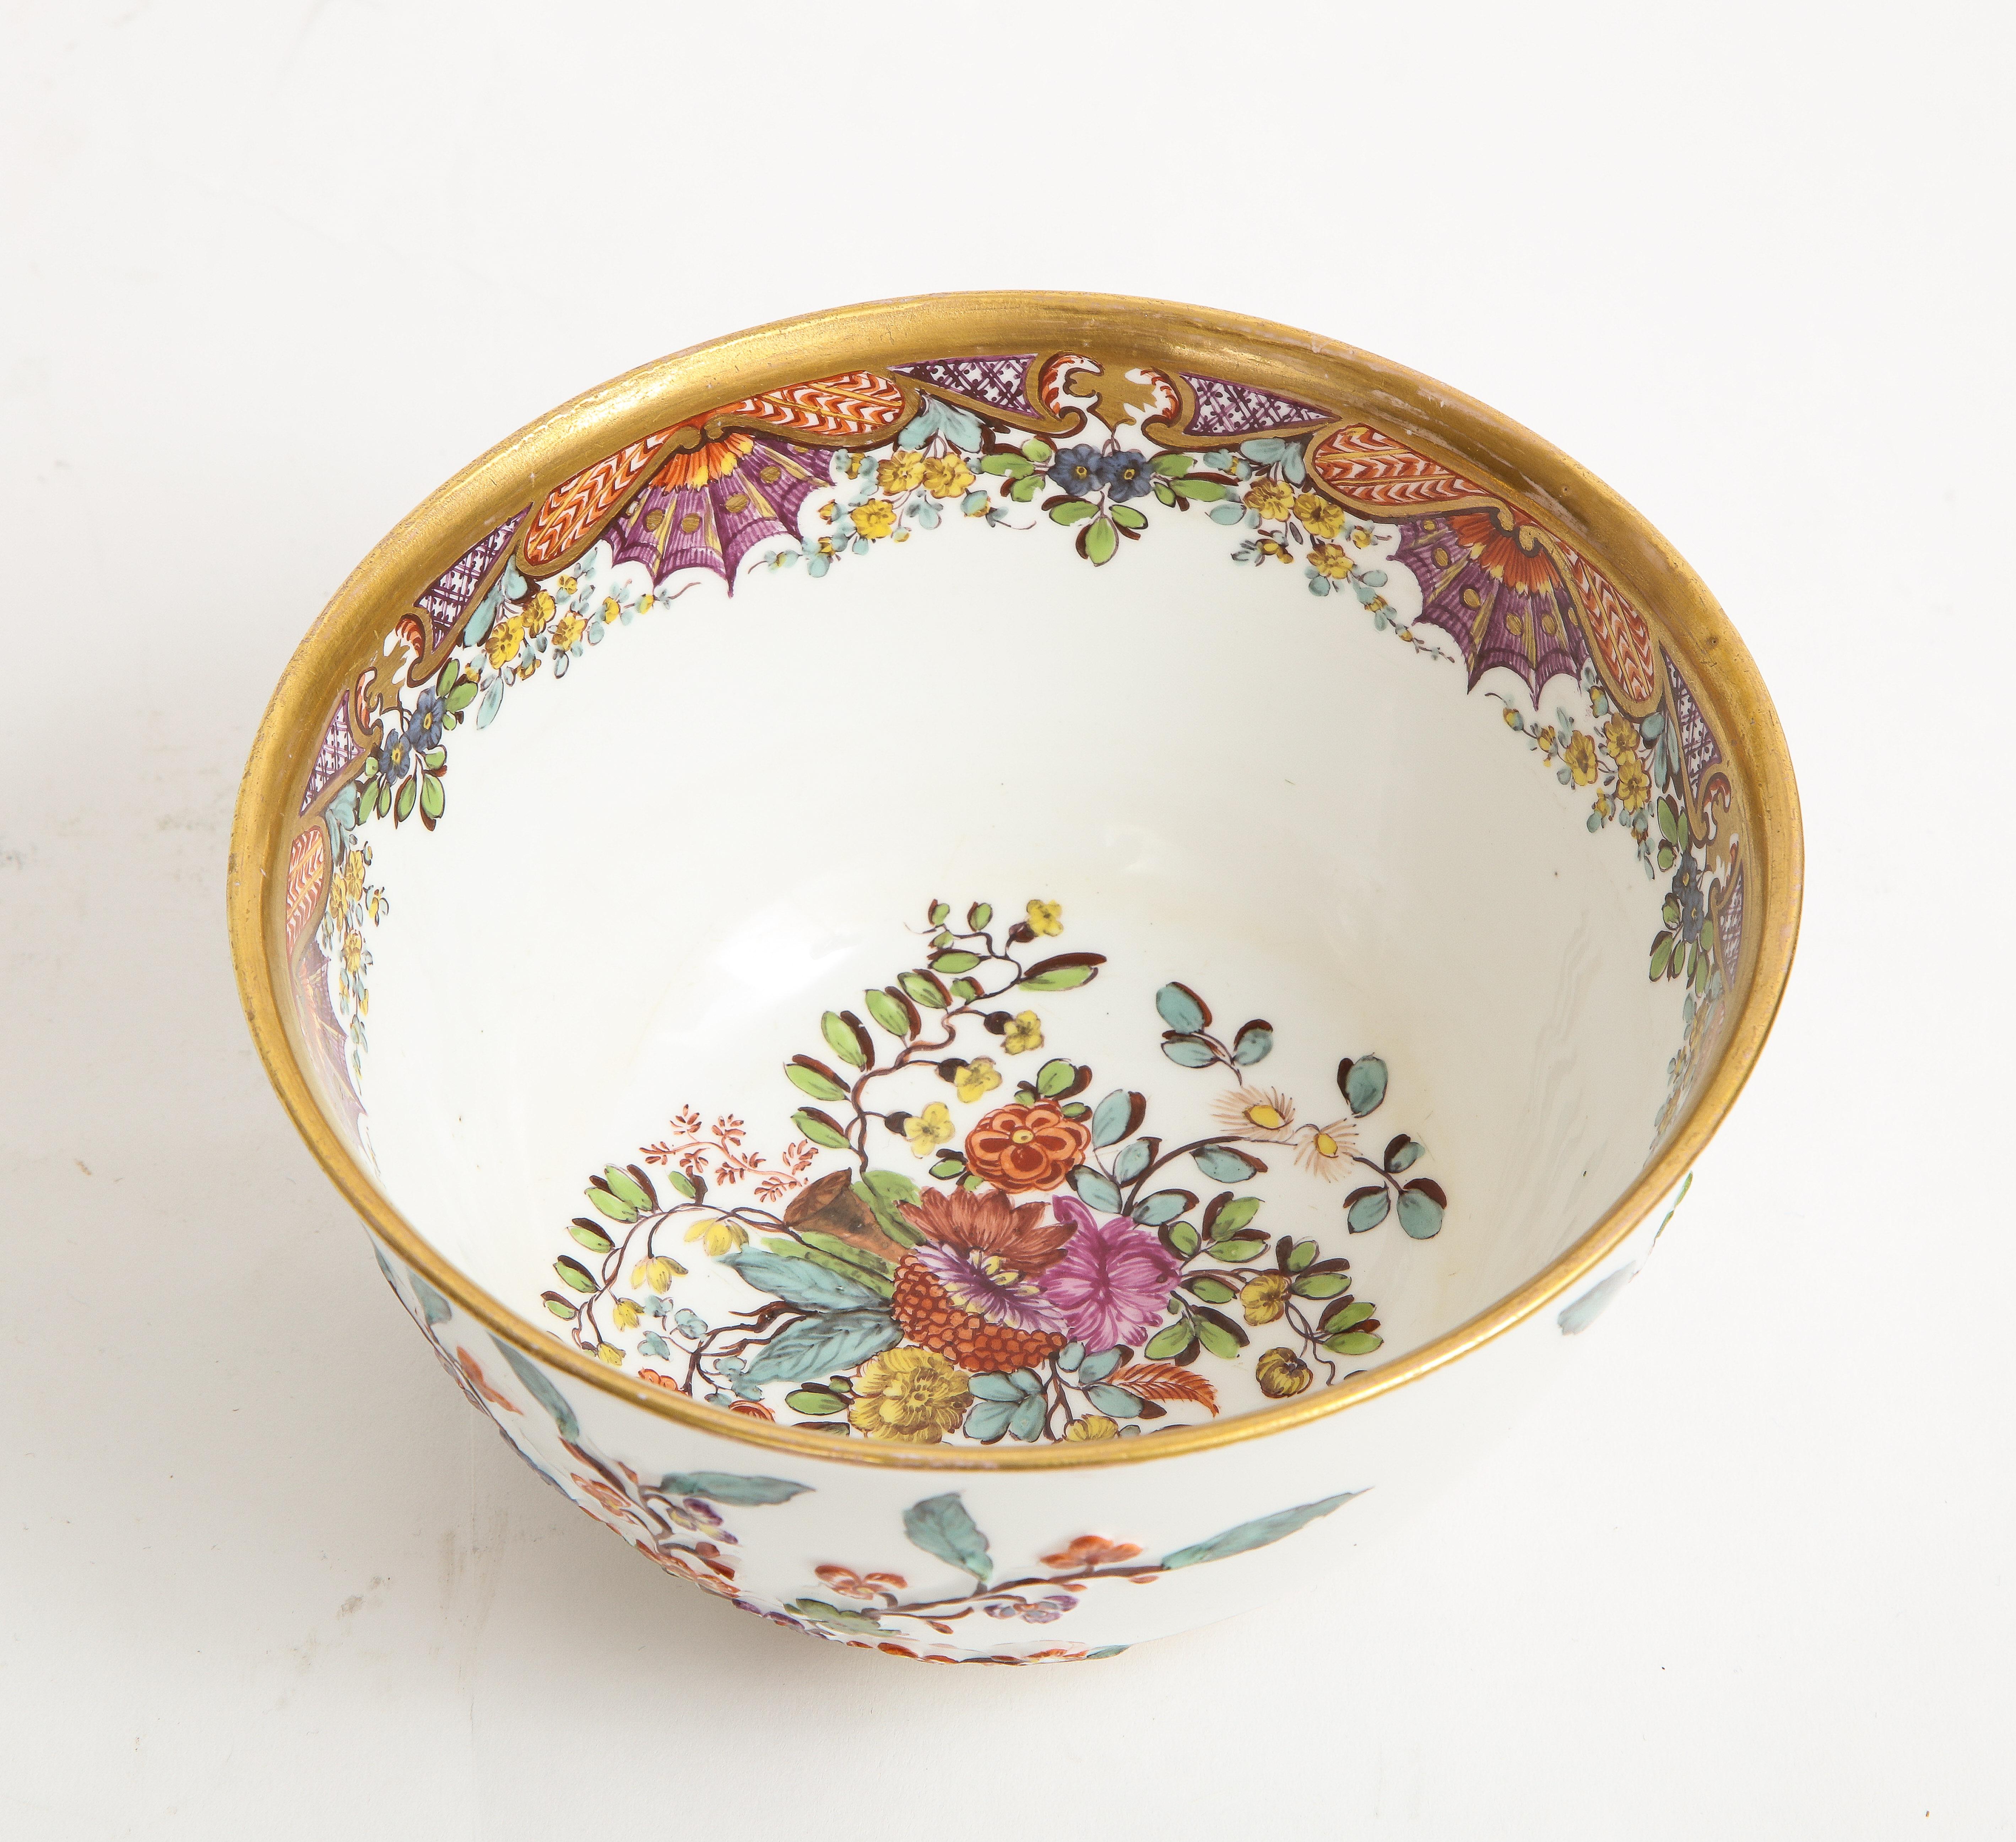 Hand-Painted 18th C. Meissen Hausmaler Decorated Bowl with High Relief Multi-Colored Flowers For Sale